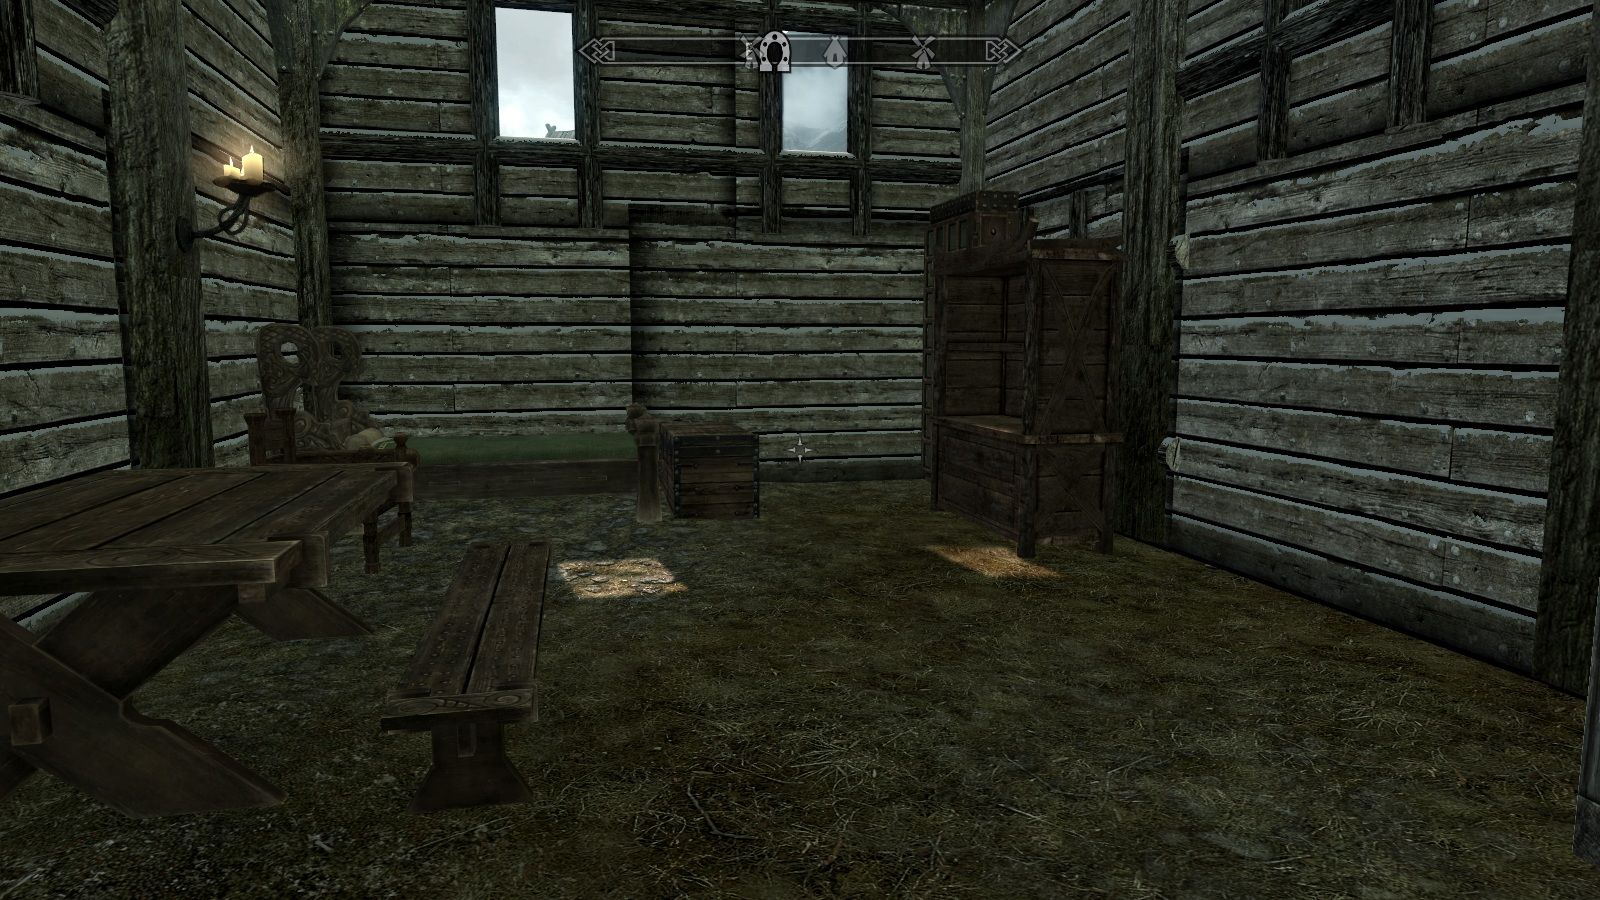 Image from the Skyrim RTS mod showing the inside of a house.